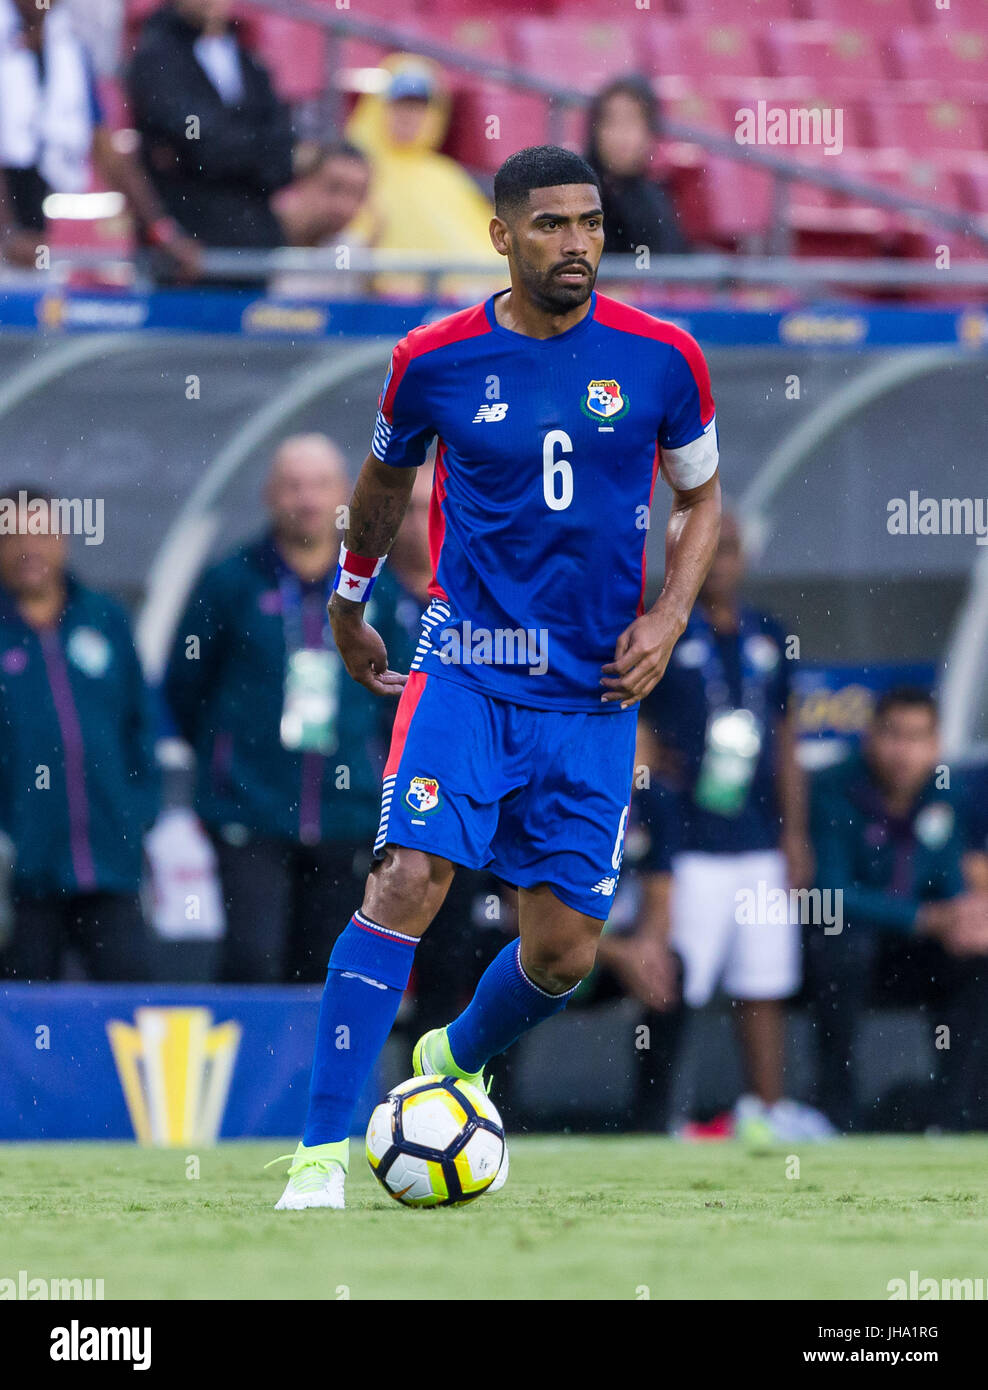 July 12, 2017 - Panama midfielder Gabriel Gomez (6) in action in a Group B match during the 2017 CONCACAF Gold Cup game between the Panama National Team and the Nicaragua National Team at Raymond James Stadium, Tampa, Florida, USA. Del Mecum/CSM Stock Photo